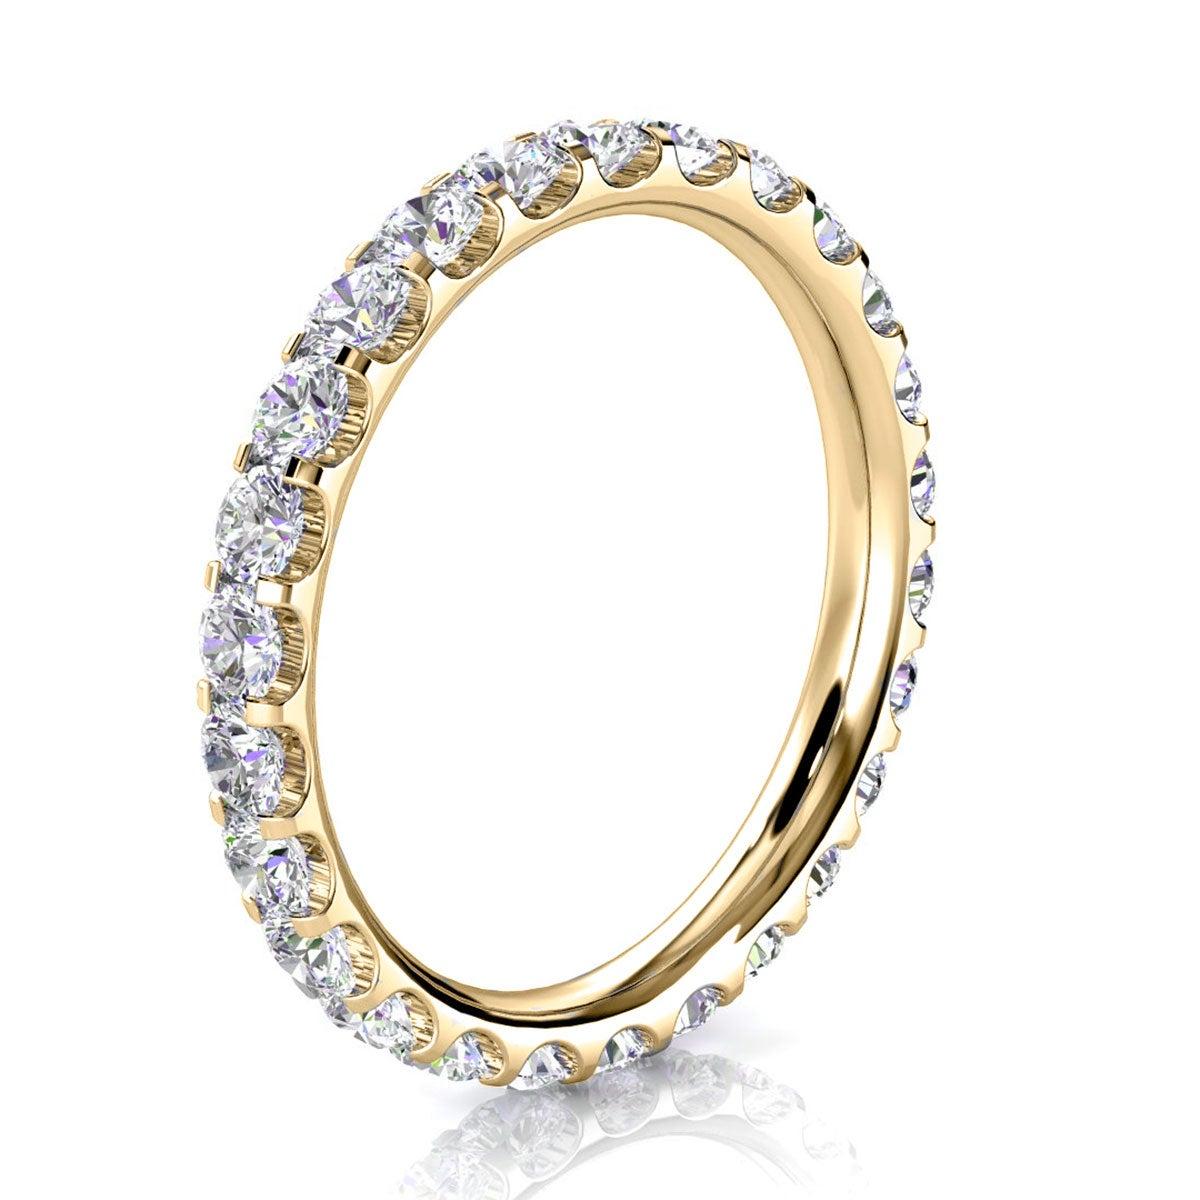 For Sale:  18k Yellow Gold Viola Eternity Micro-Prong Diamond Ring '1 Ct. tw' 2